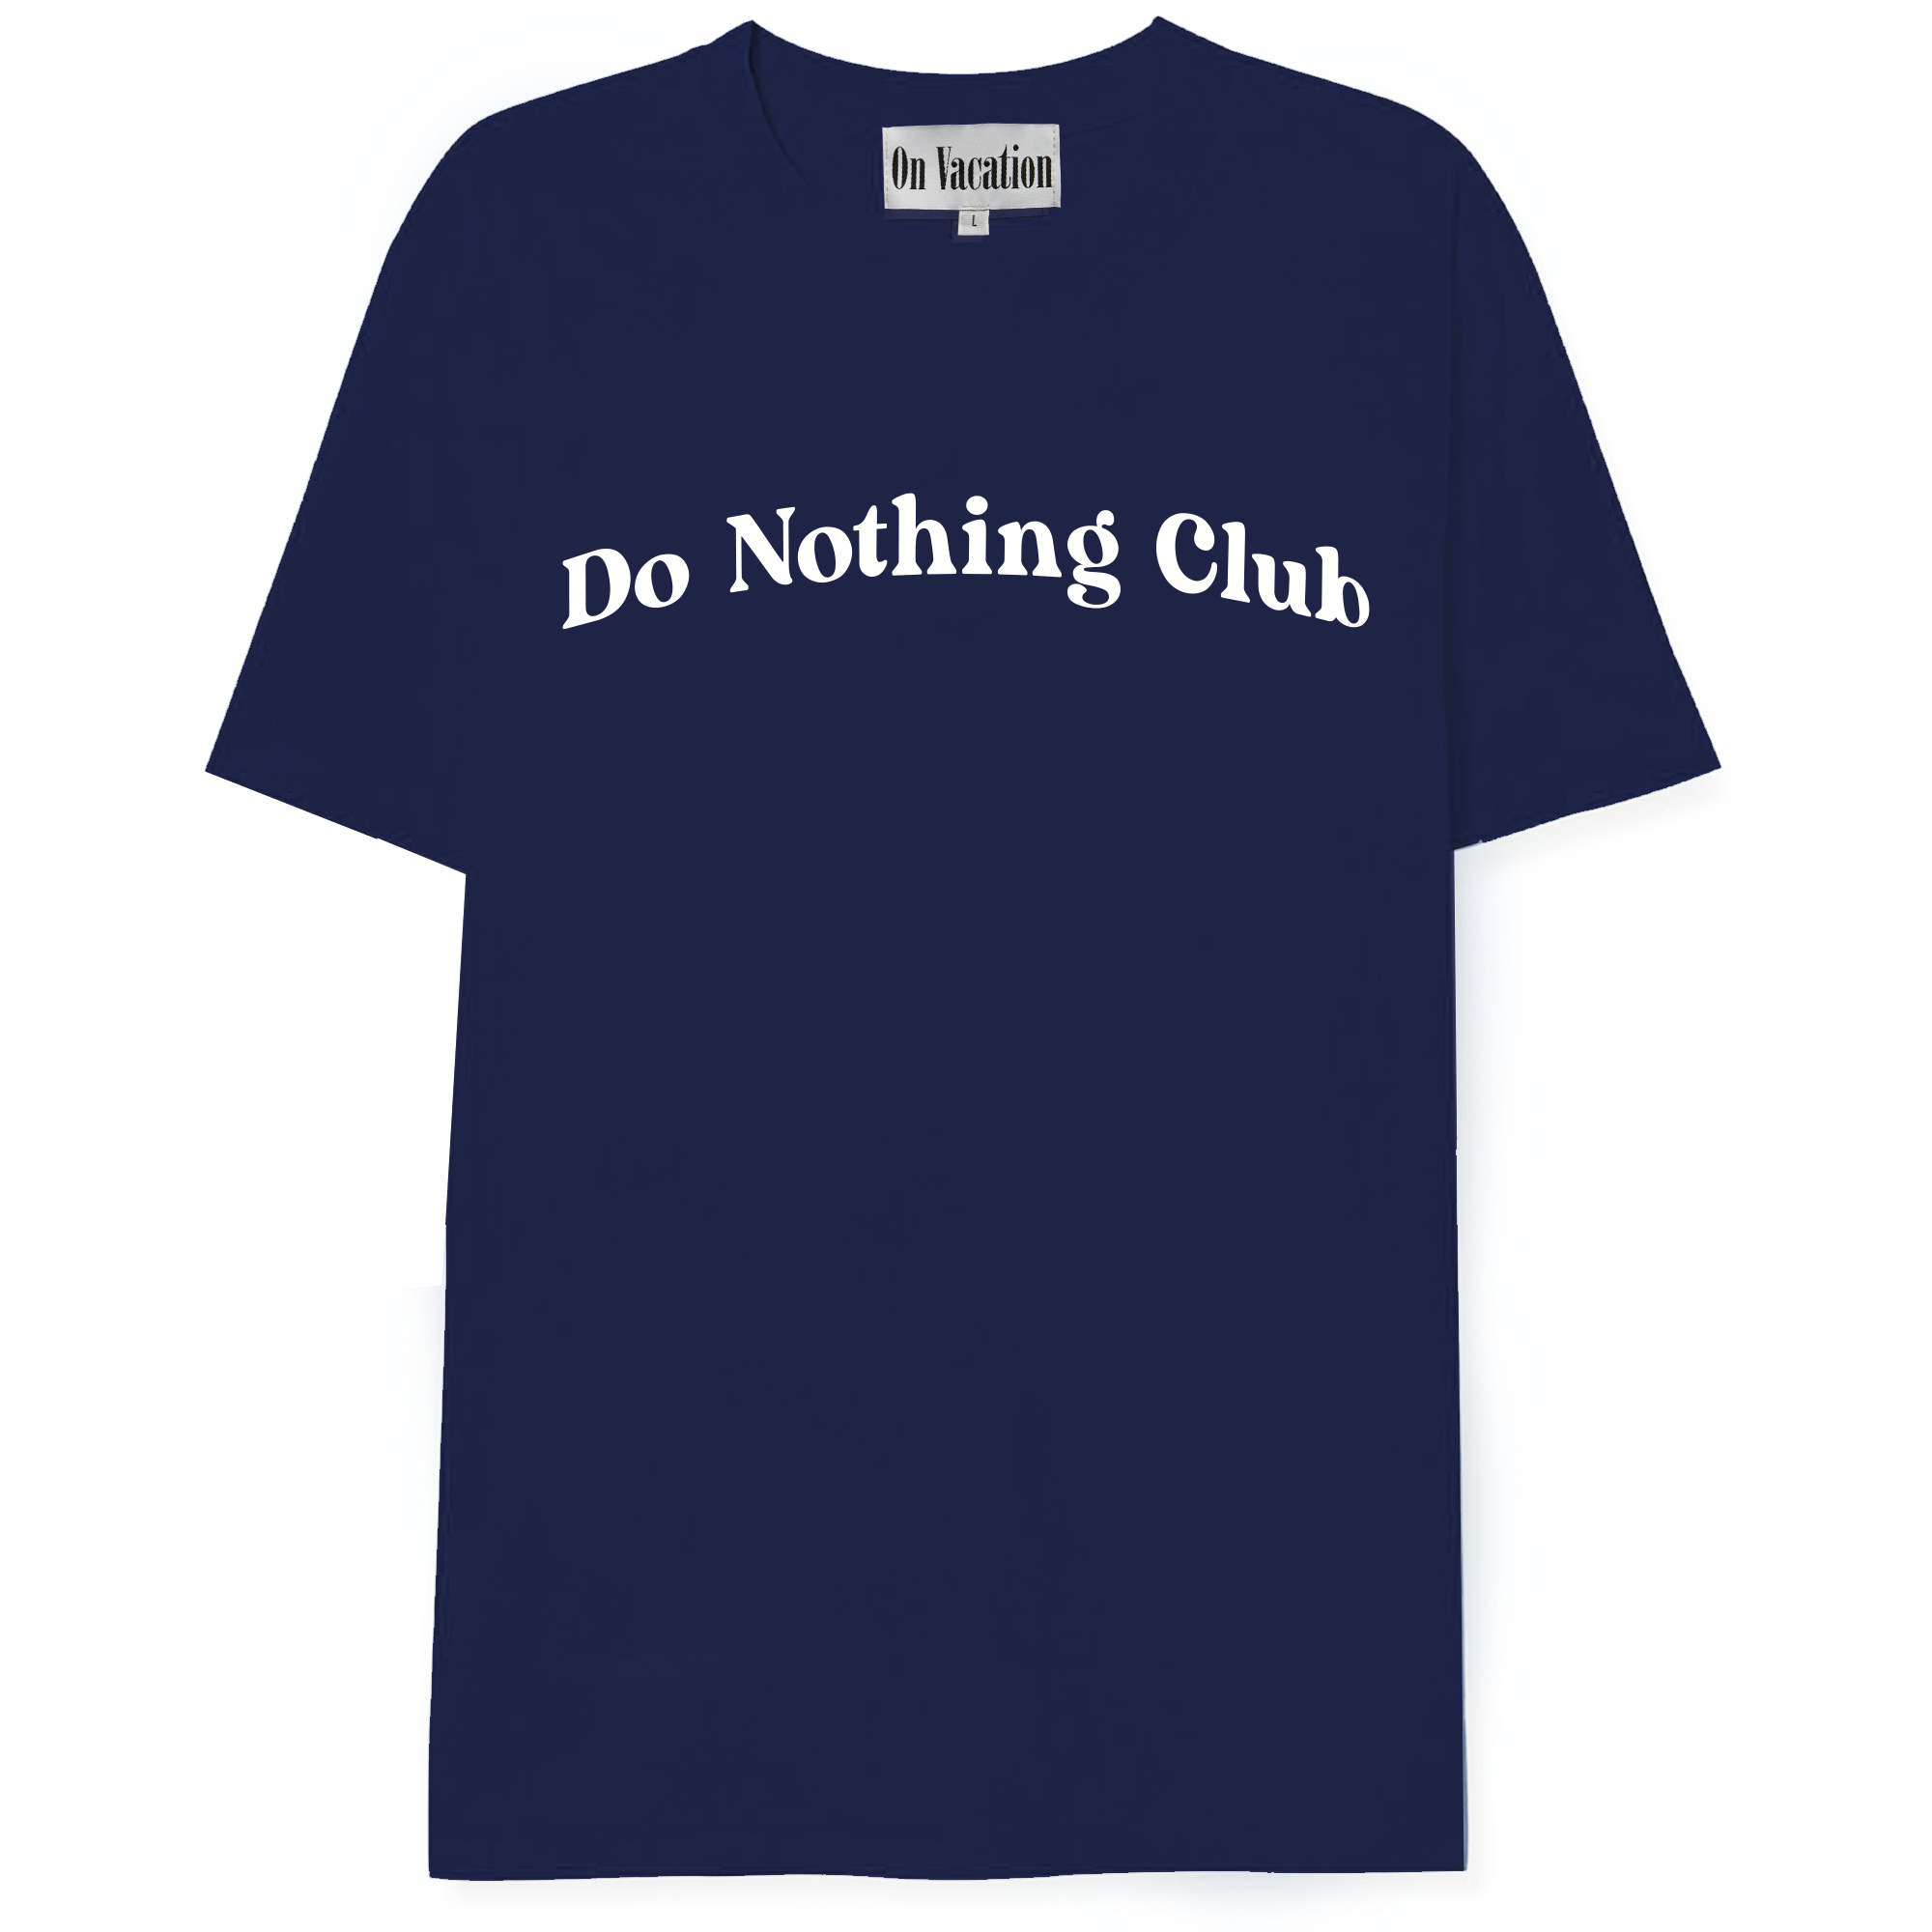 On Vacation Ladies Bubbly T-Shirt "Do Nothing Club" - Navy